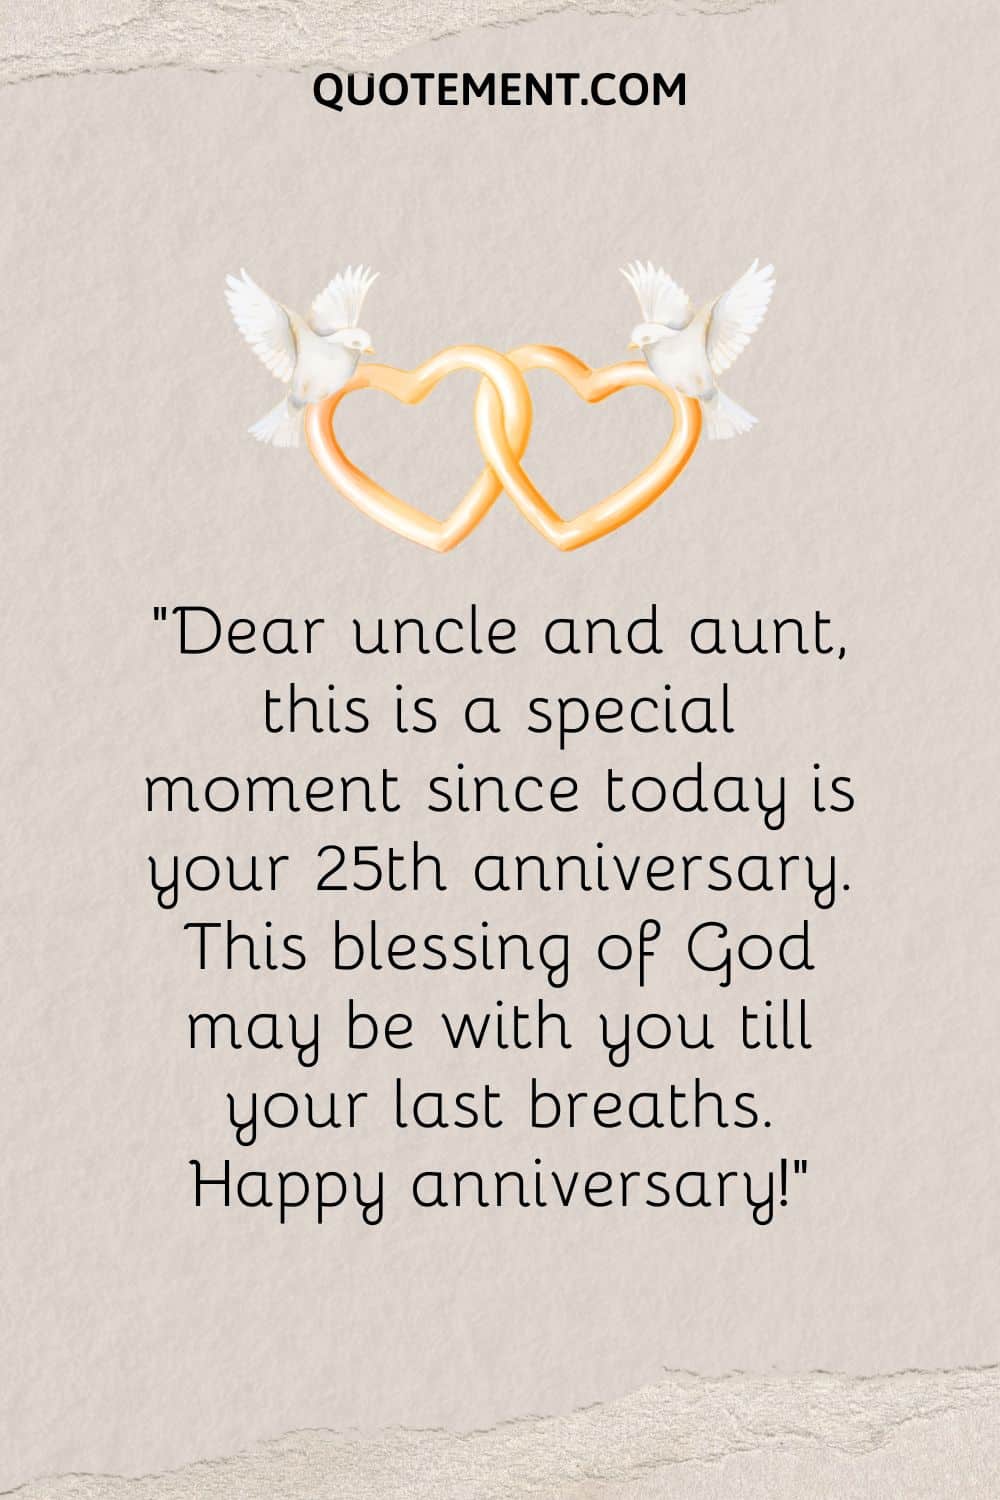 Dear uncle and aunt, this is a special moment since today is your 25th anniversary